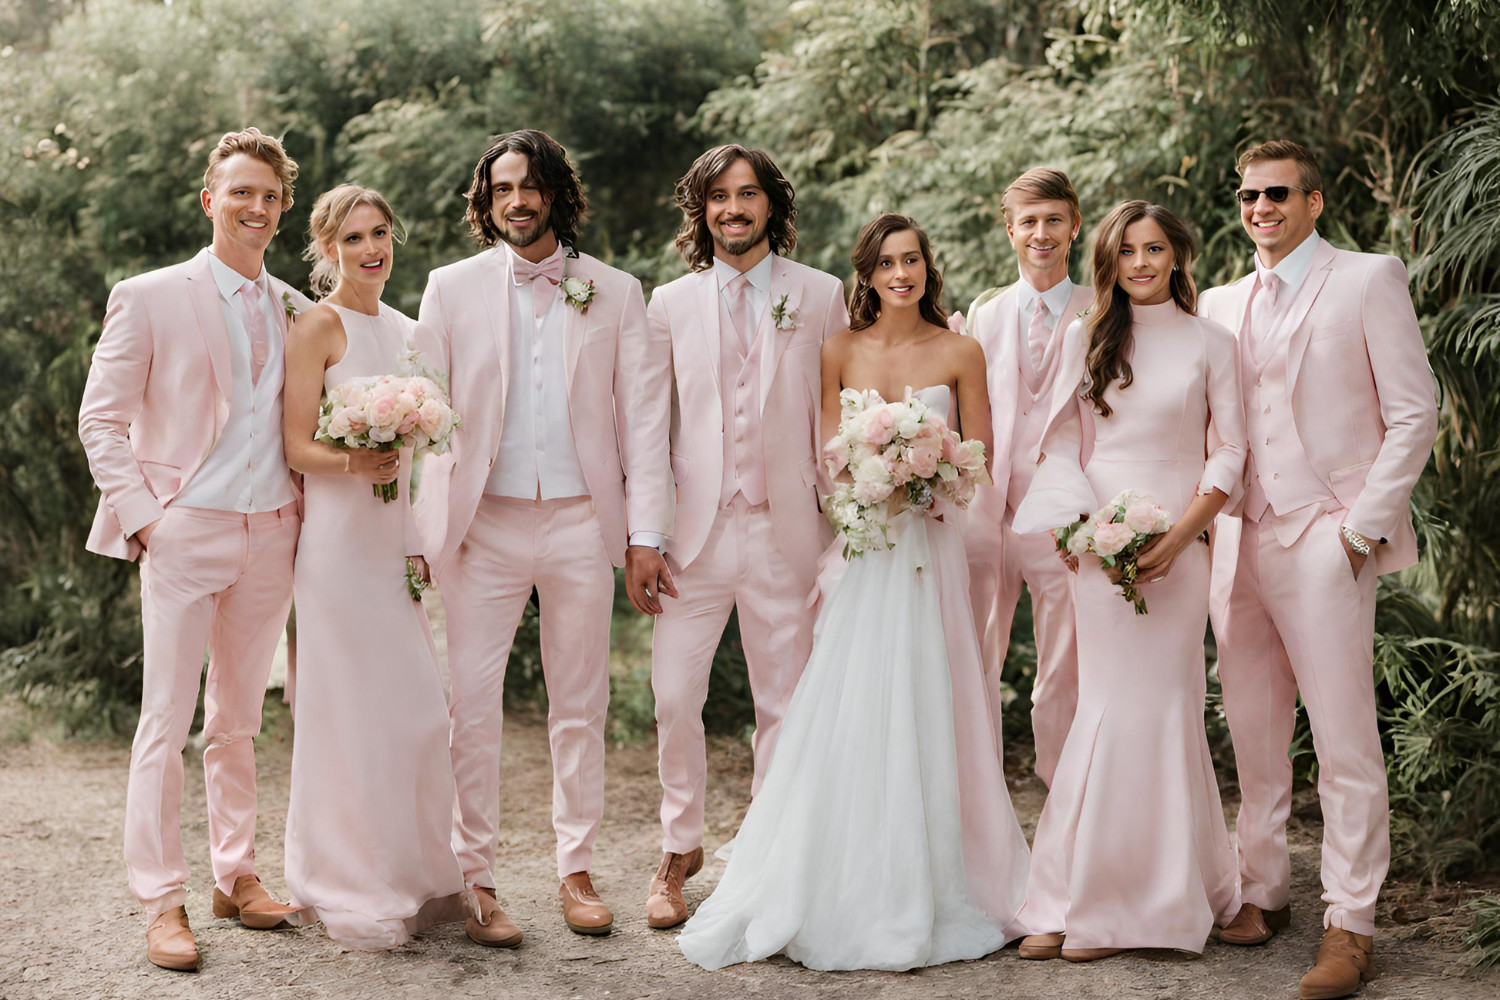 Summer Wedding Suits for Men Ready to Tie the Knot in Style